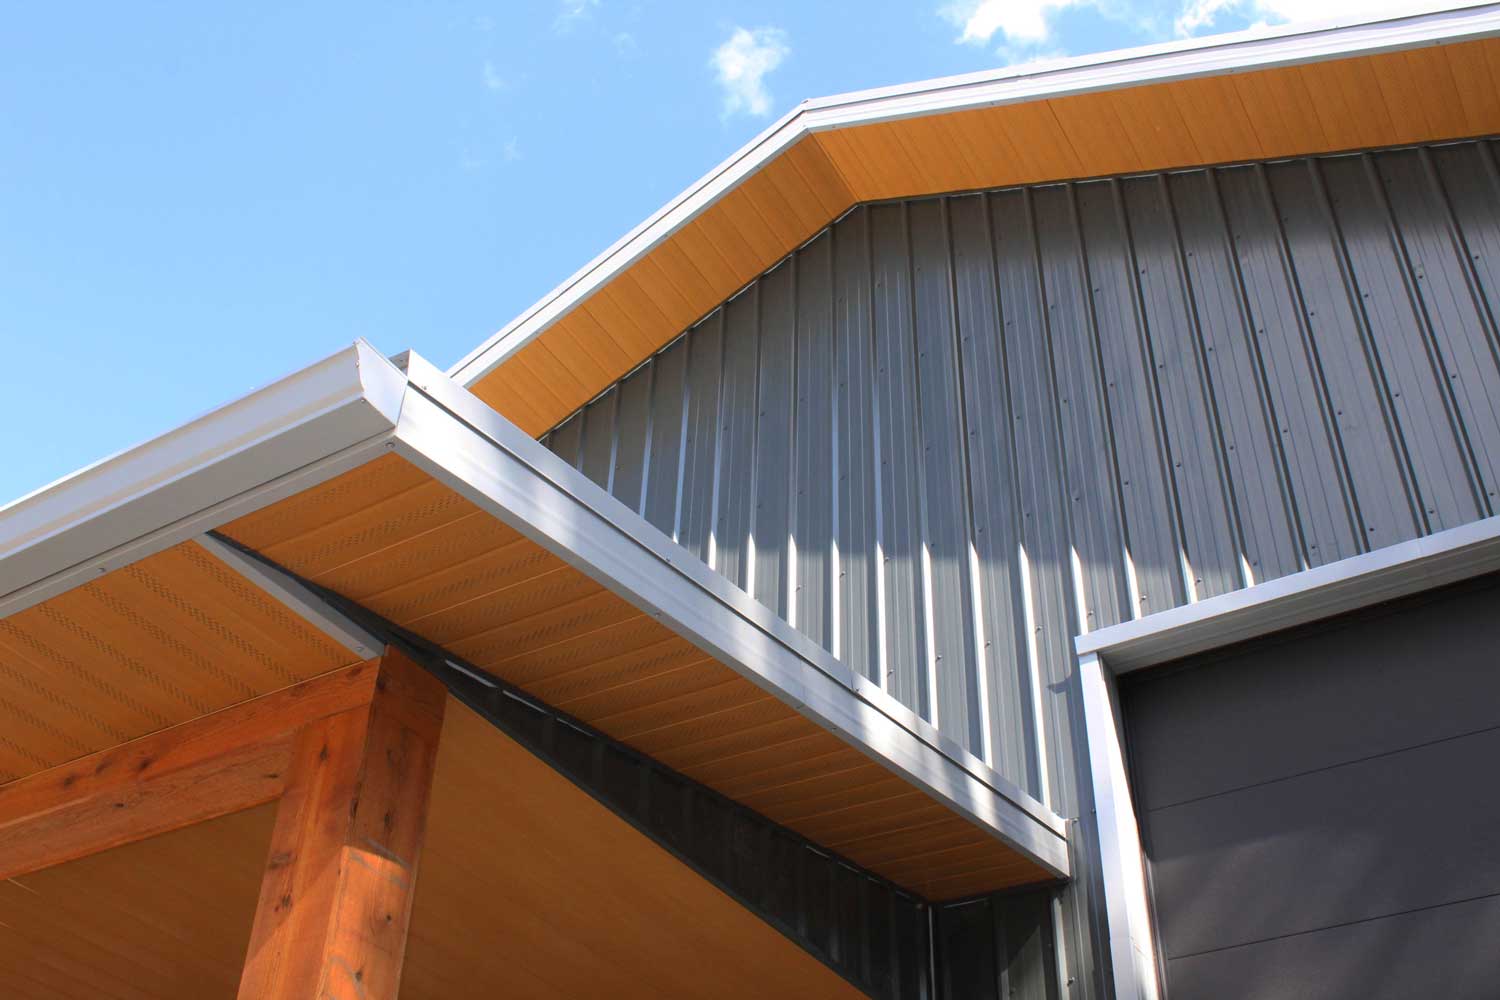 Gunmetal grey siding and Vented Soffit and non-vented soffit in Autumn Woodgrain on a residential work shop